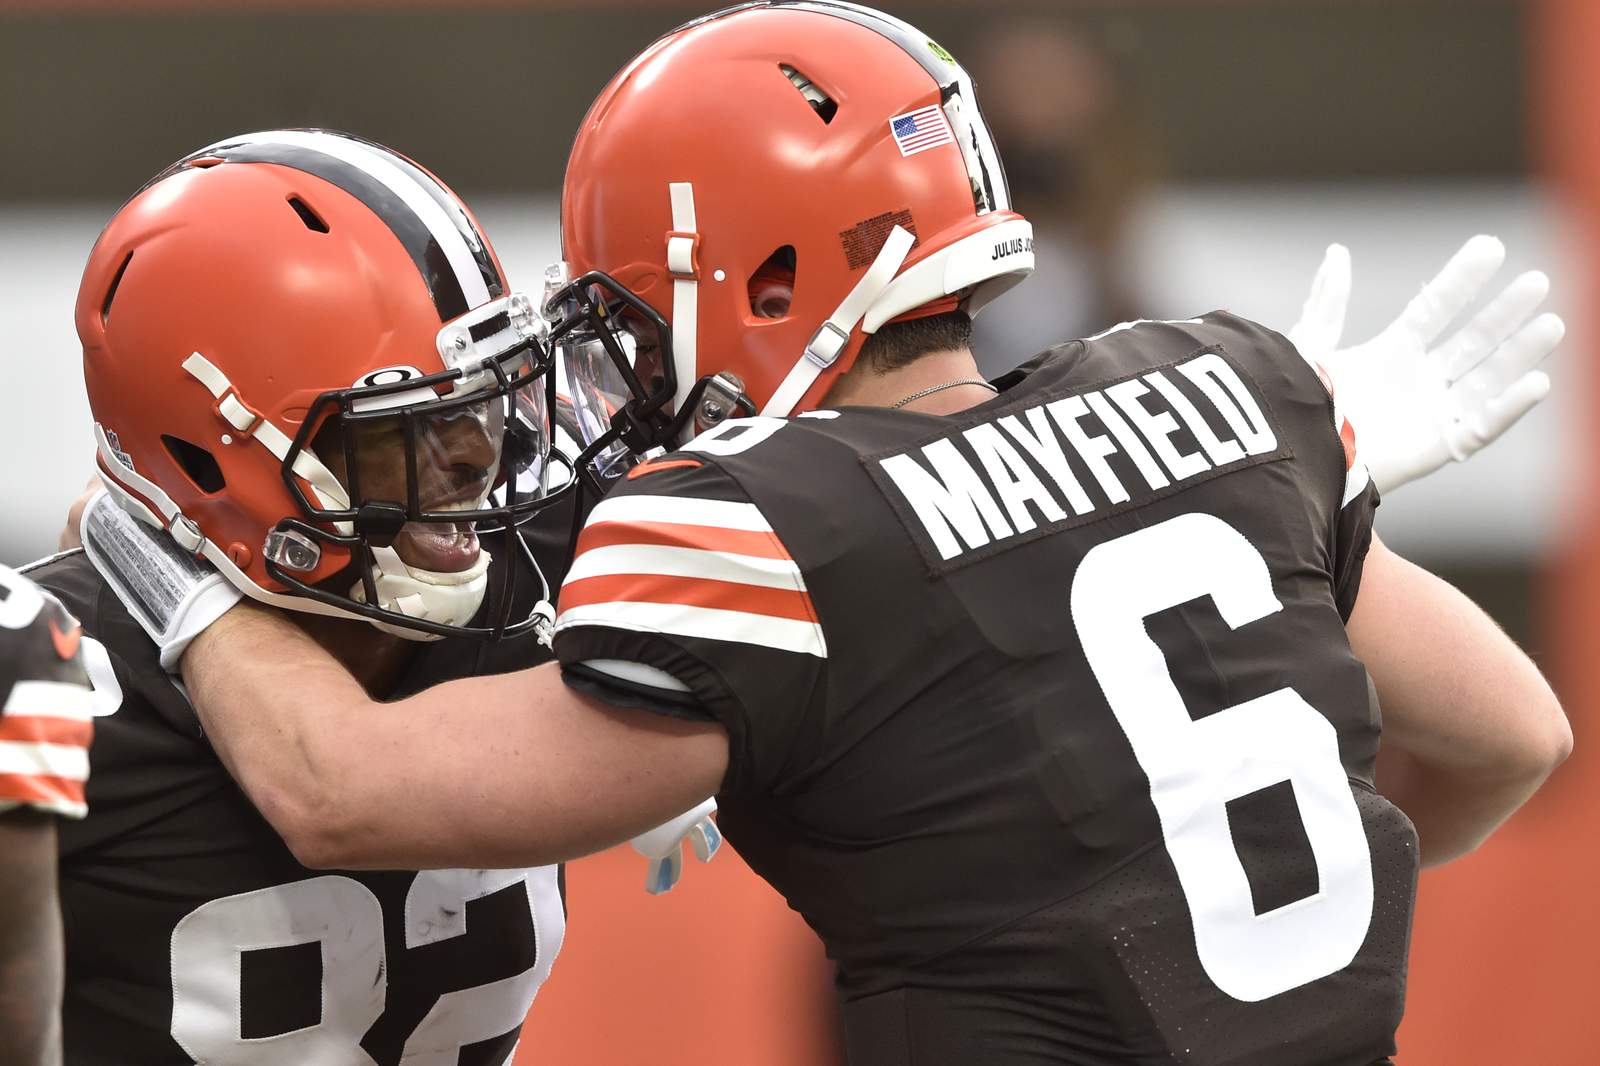 Mayfield throws 2 TDs, Browns hold off Colts to move to 4-1